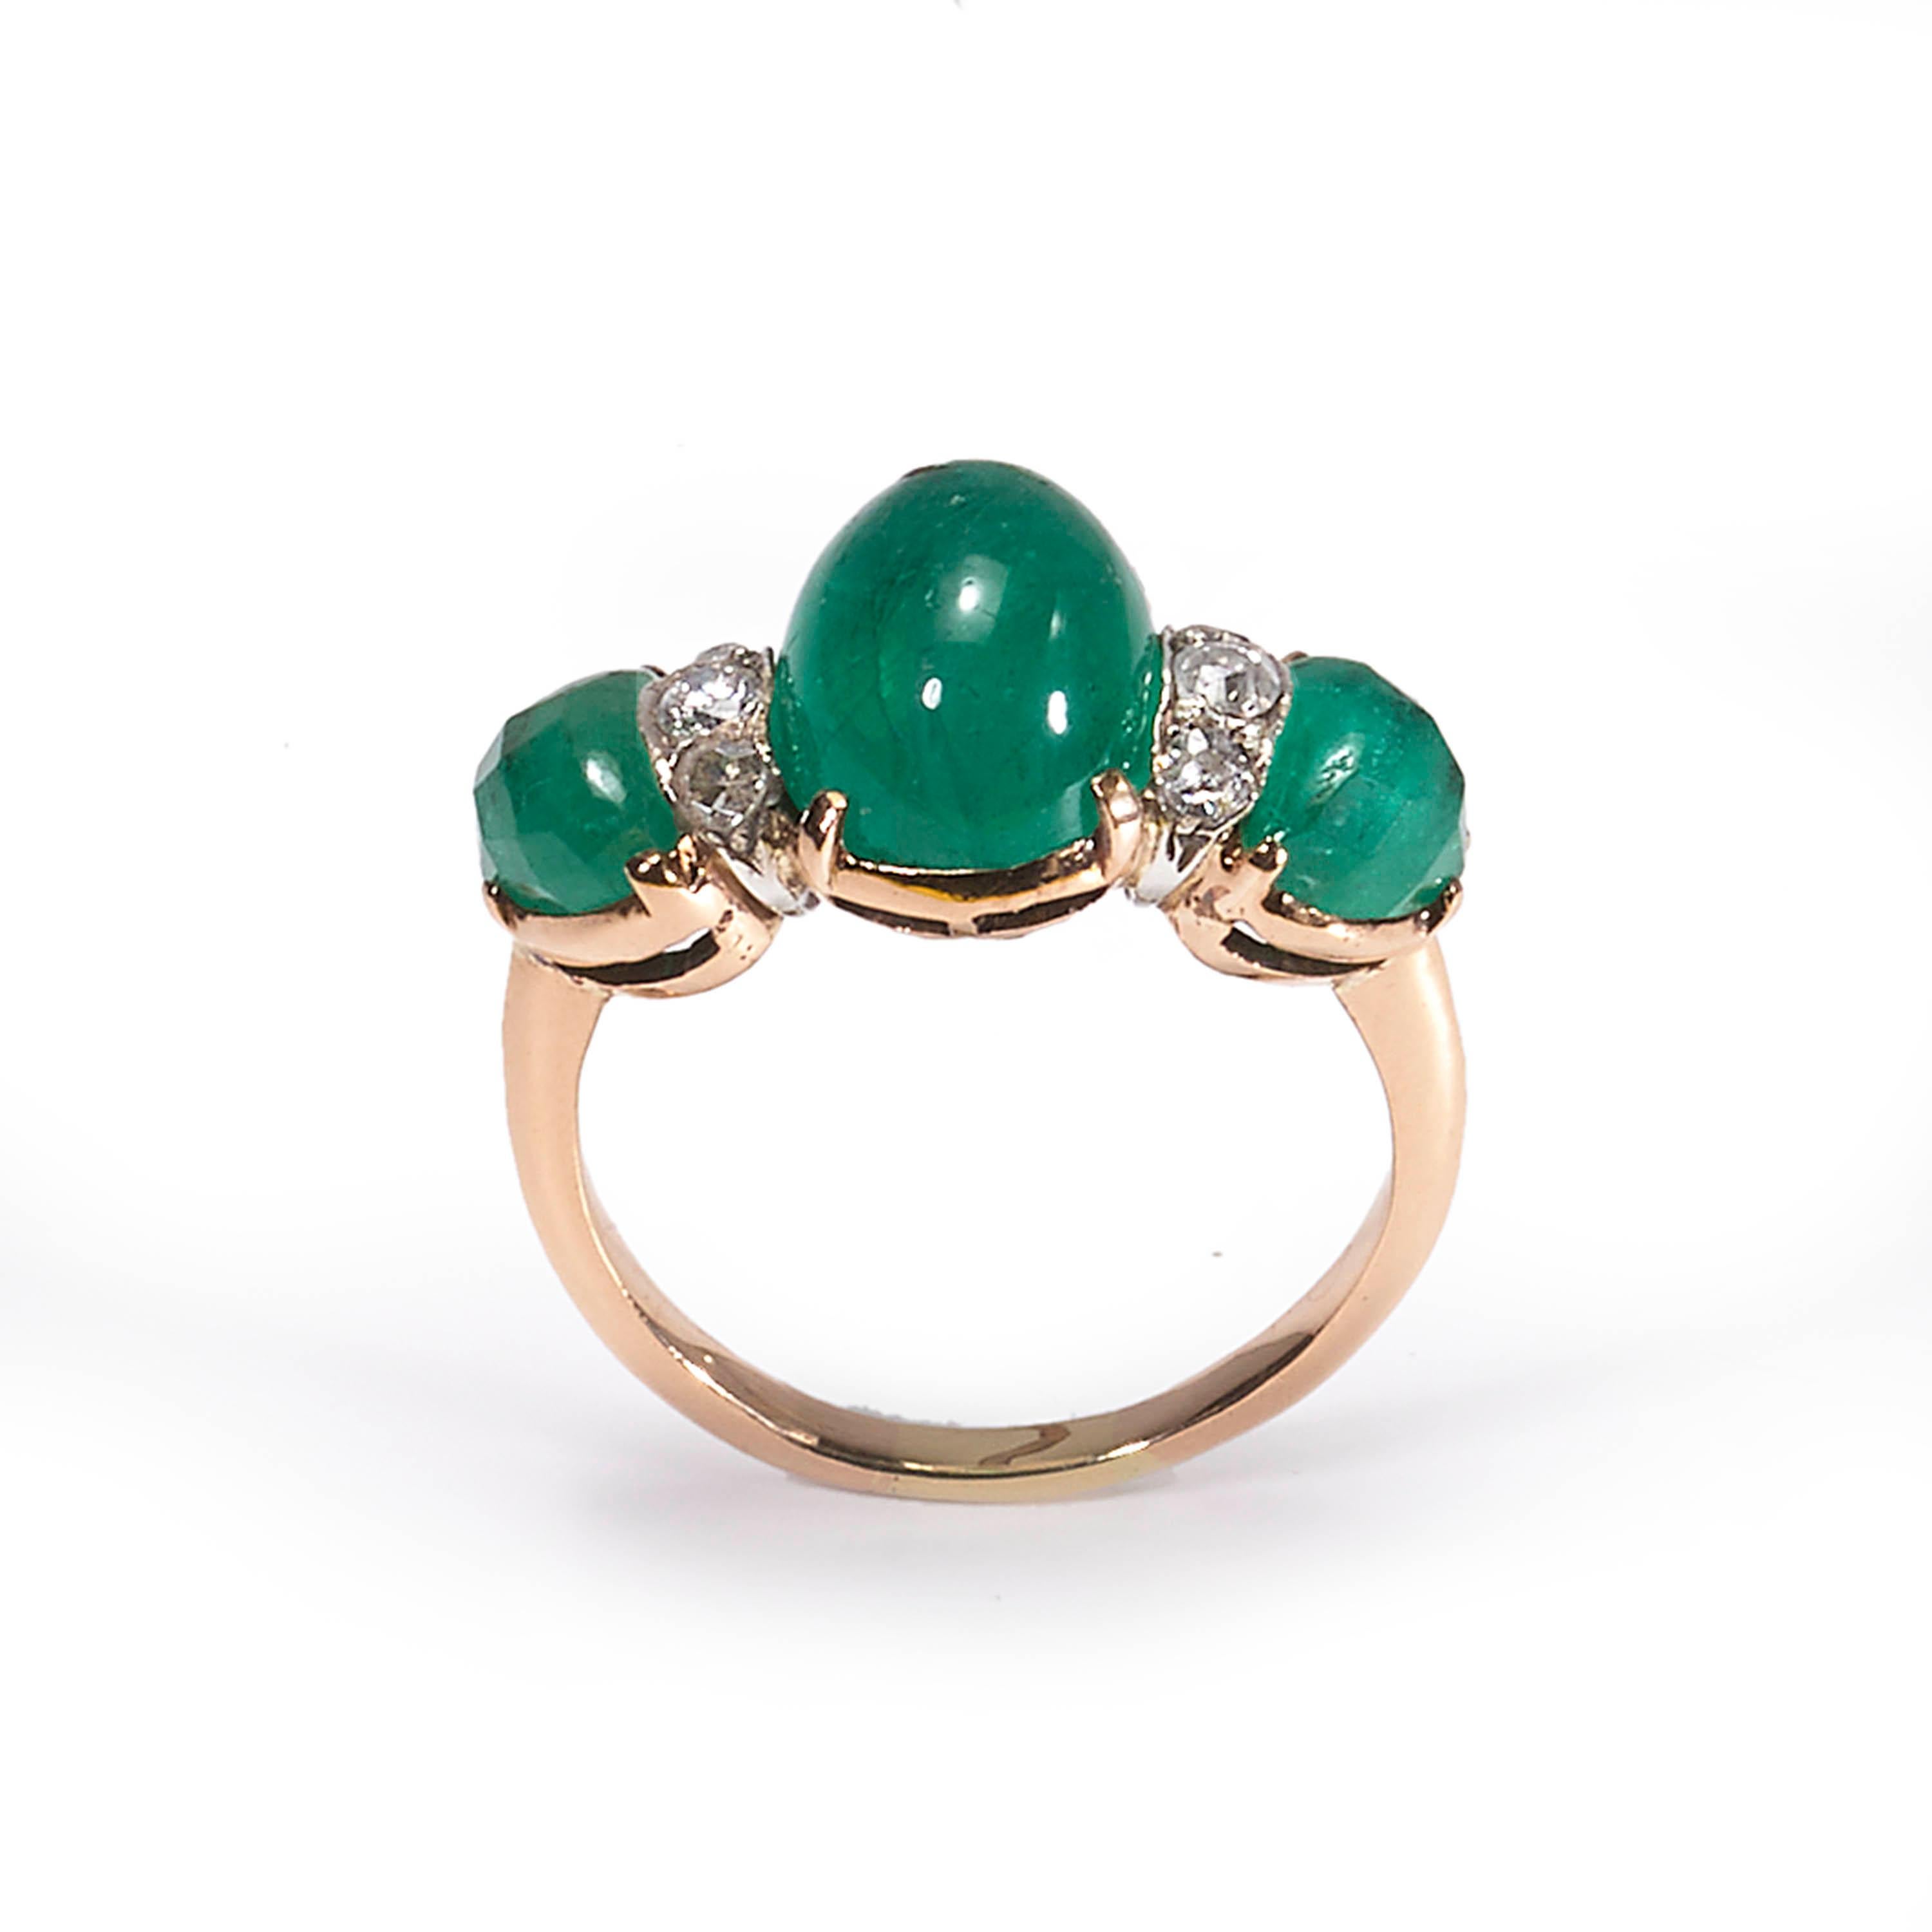 A vintage three stone ring, set with a central cabochon-cut emerald, weighing an estimated 2.80 carats, with a fancy faceted emerald set to each shoulder, weighing an estimated 1.60 carats each, with a total of six round brilliant-cut diamonds set